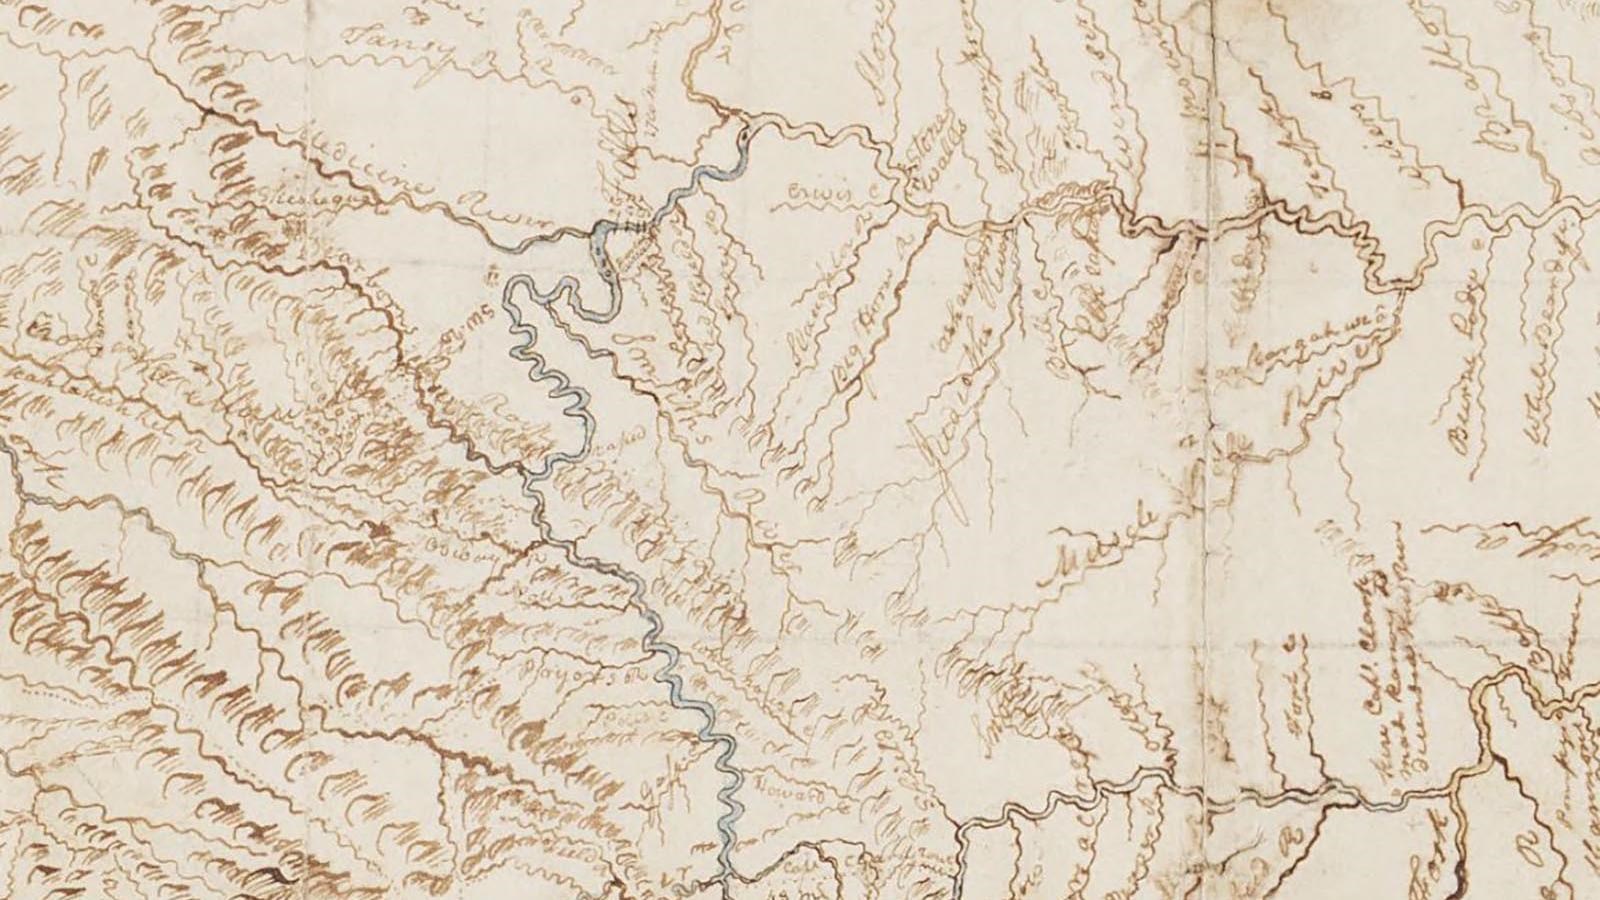 Map sketch showing rivers nad tributaries, with labels next to most. 